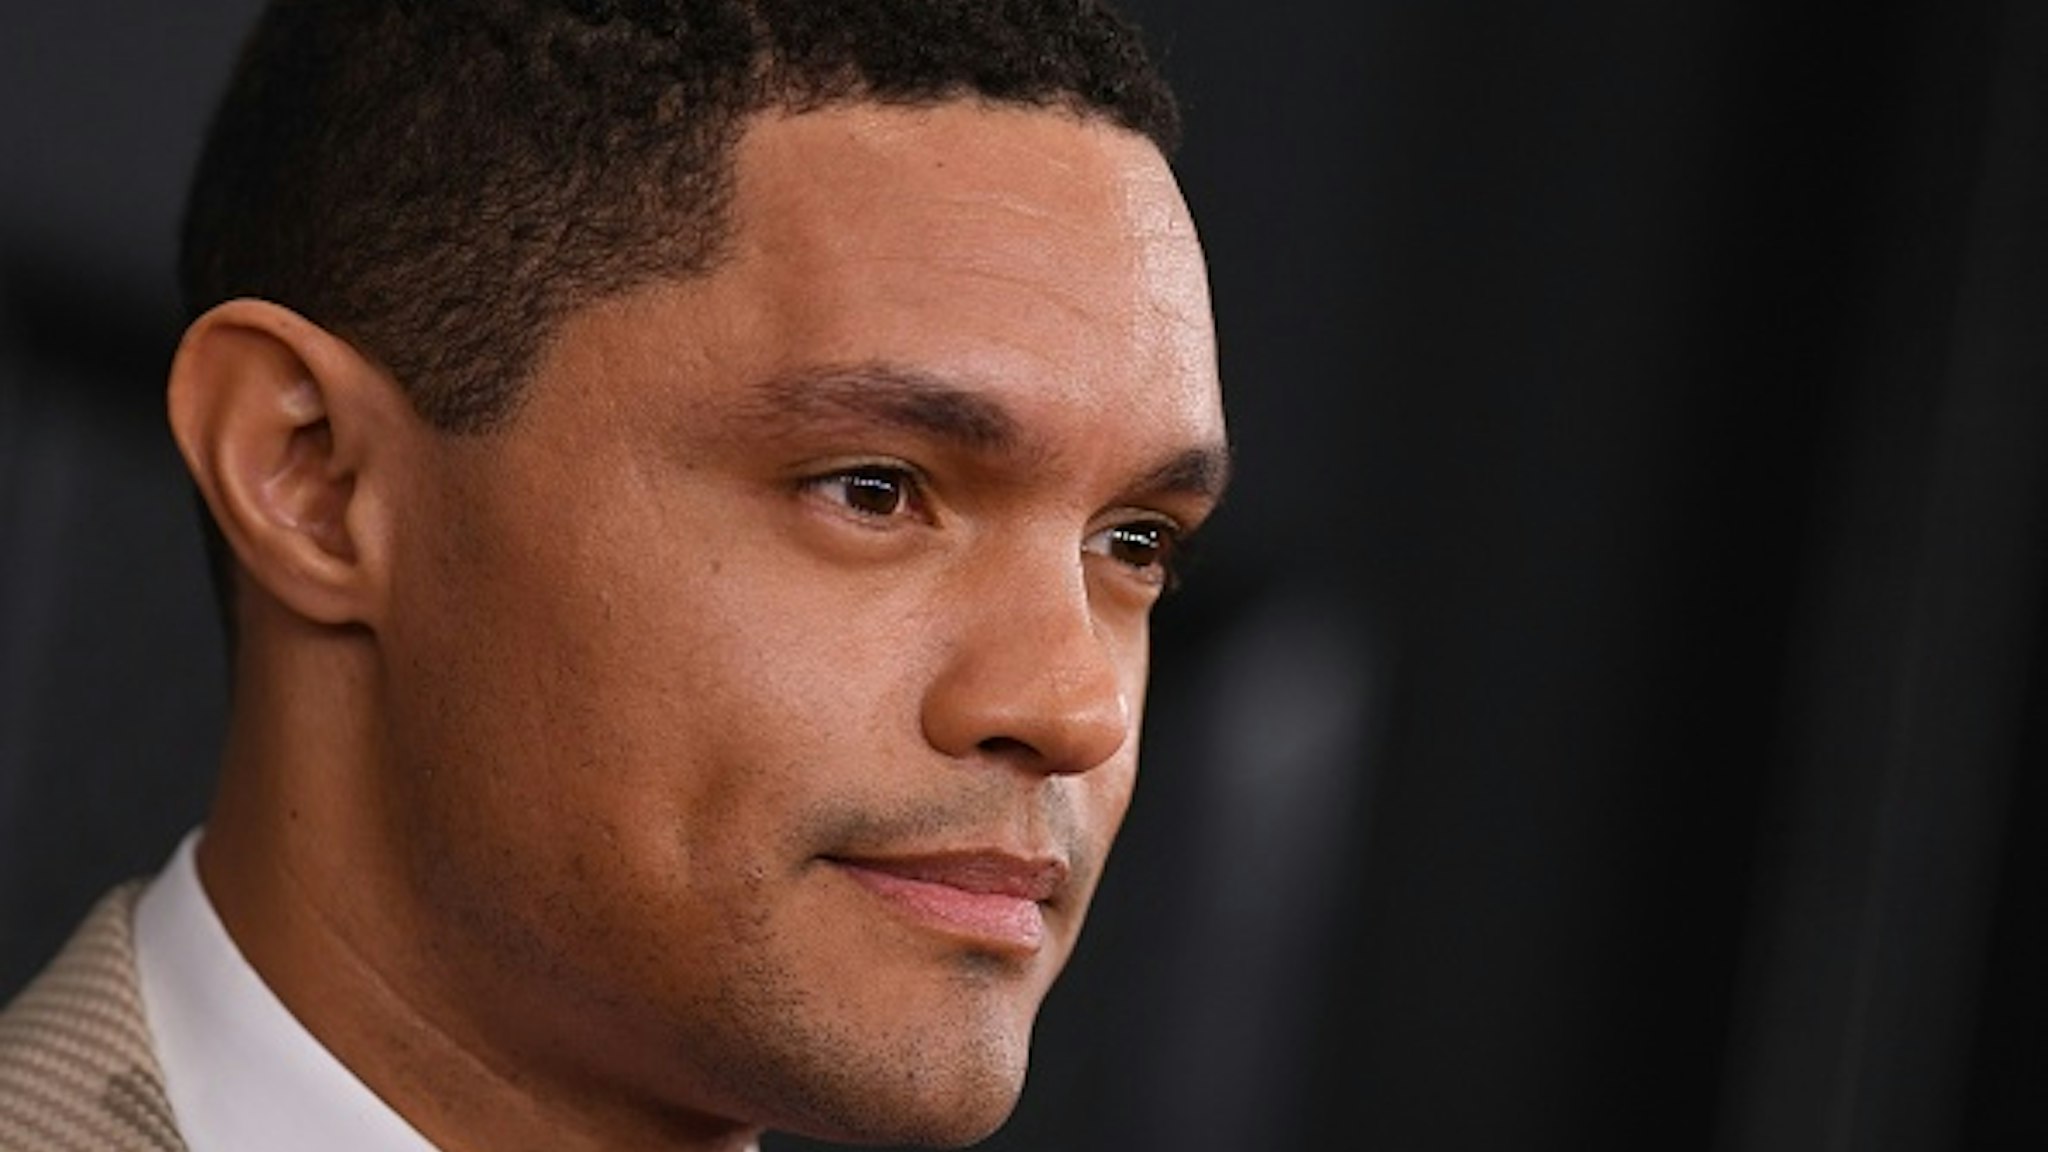 South African comedian Trevor Noah arrives for the 62nd Annual Grammy Awards on January 26, 2020, in Los Angeles.